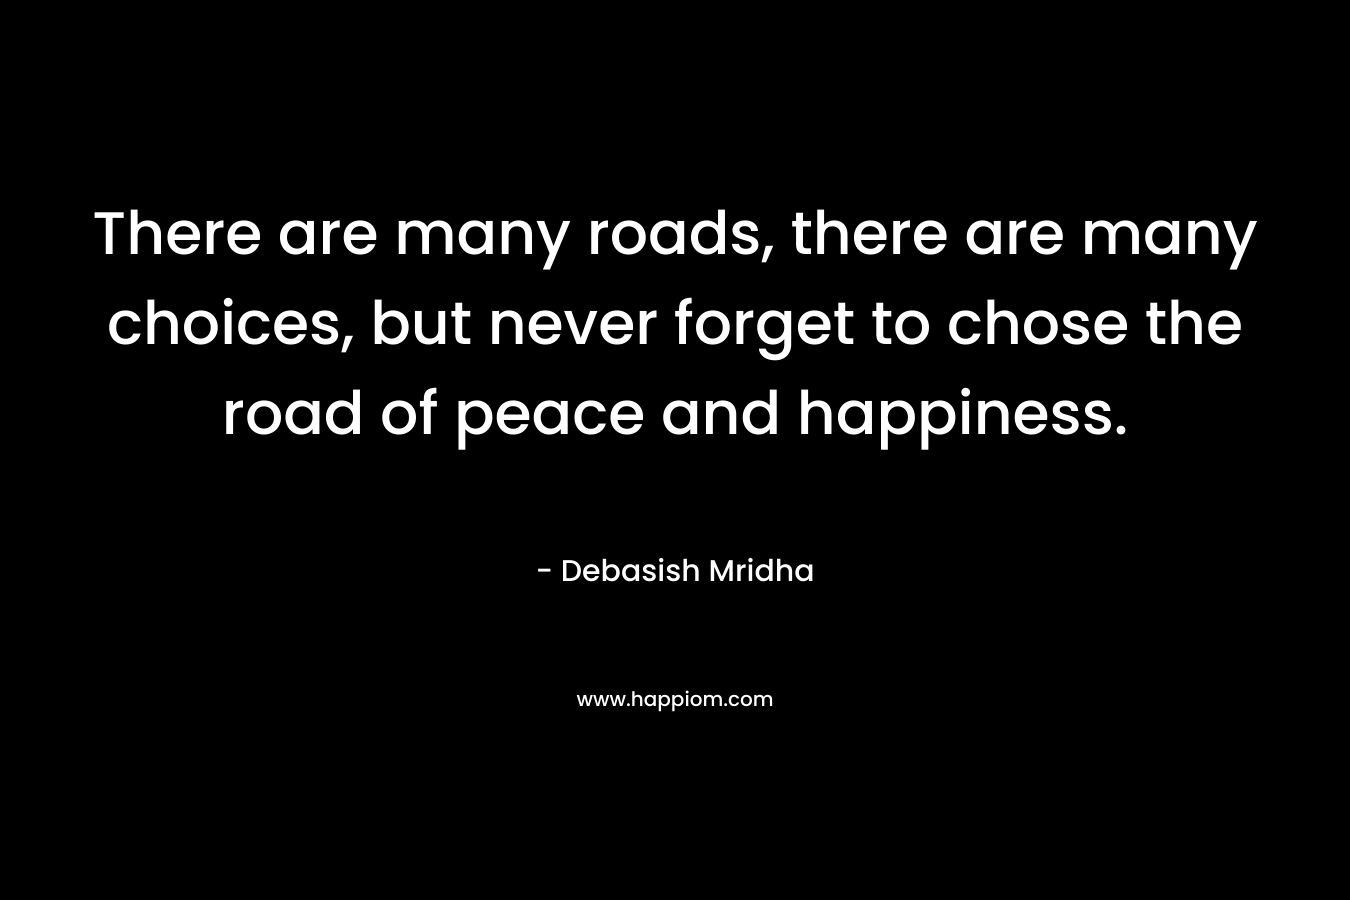 There are many roads,  there are many choices, but never forget to chose the road of peace and happiness.